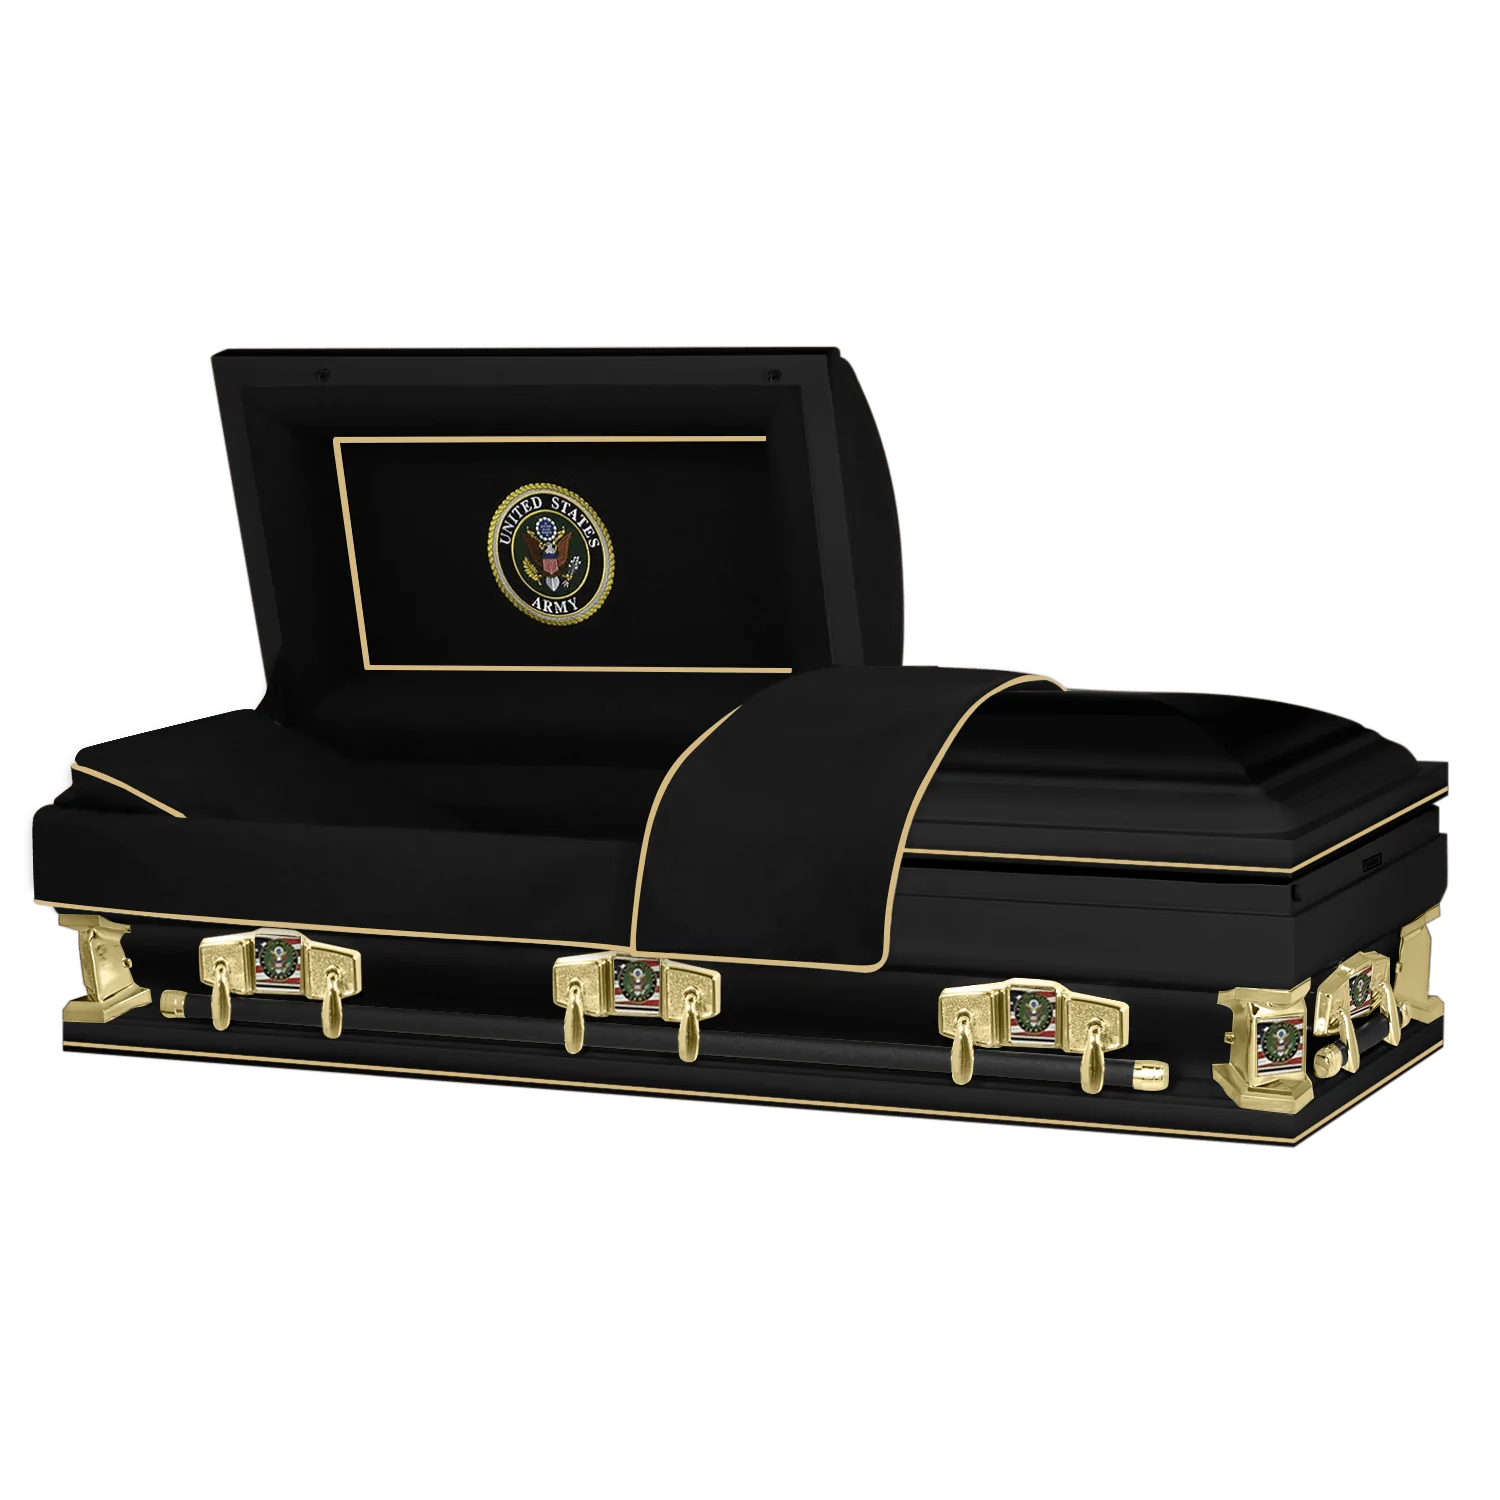 When and how to buy a military casket?